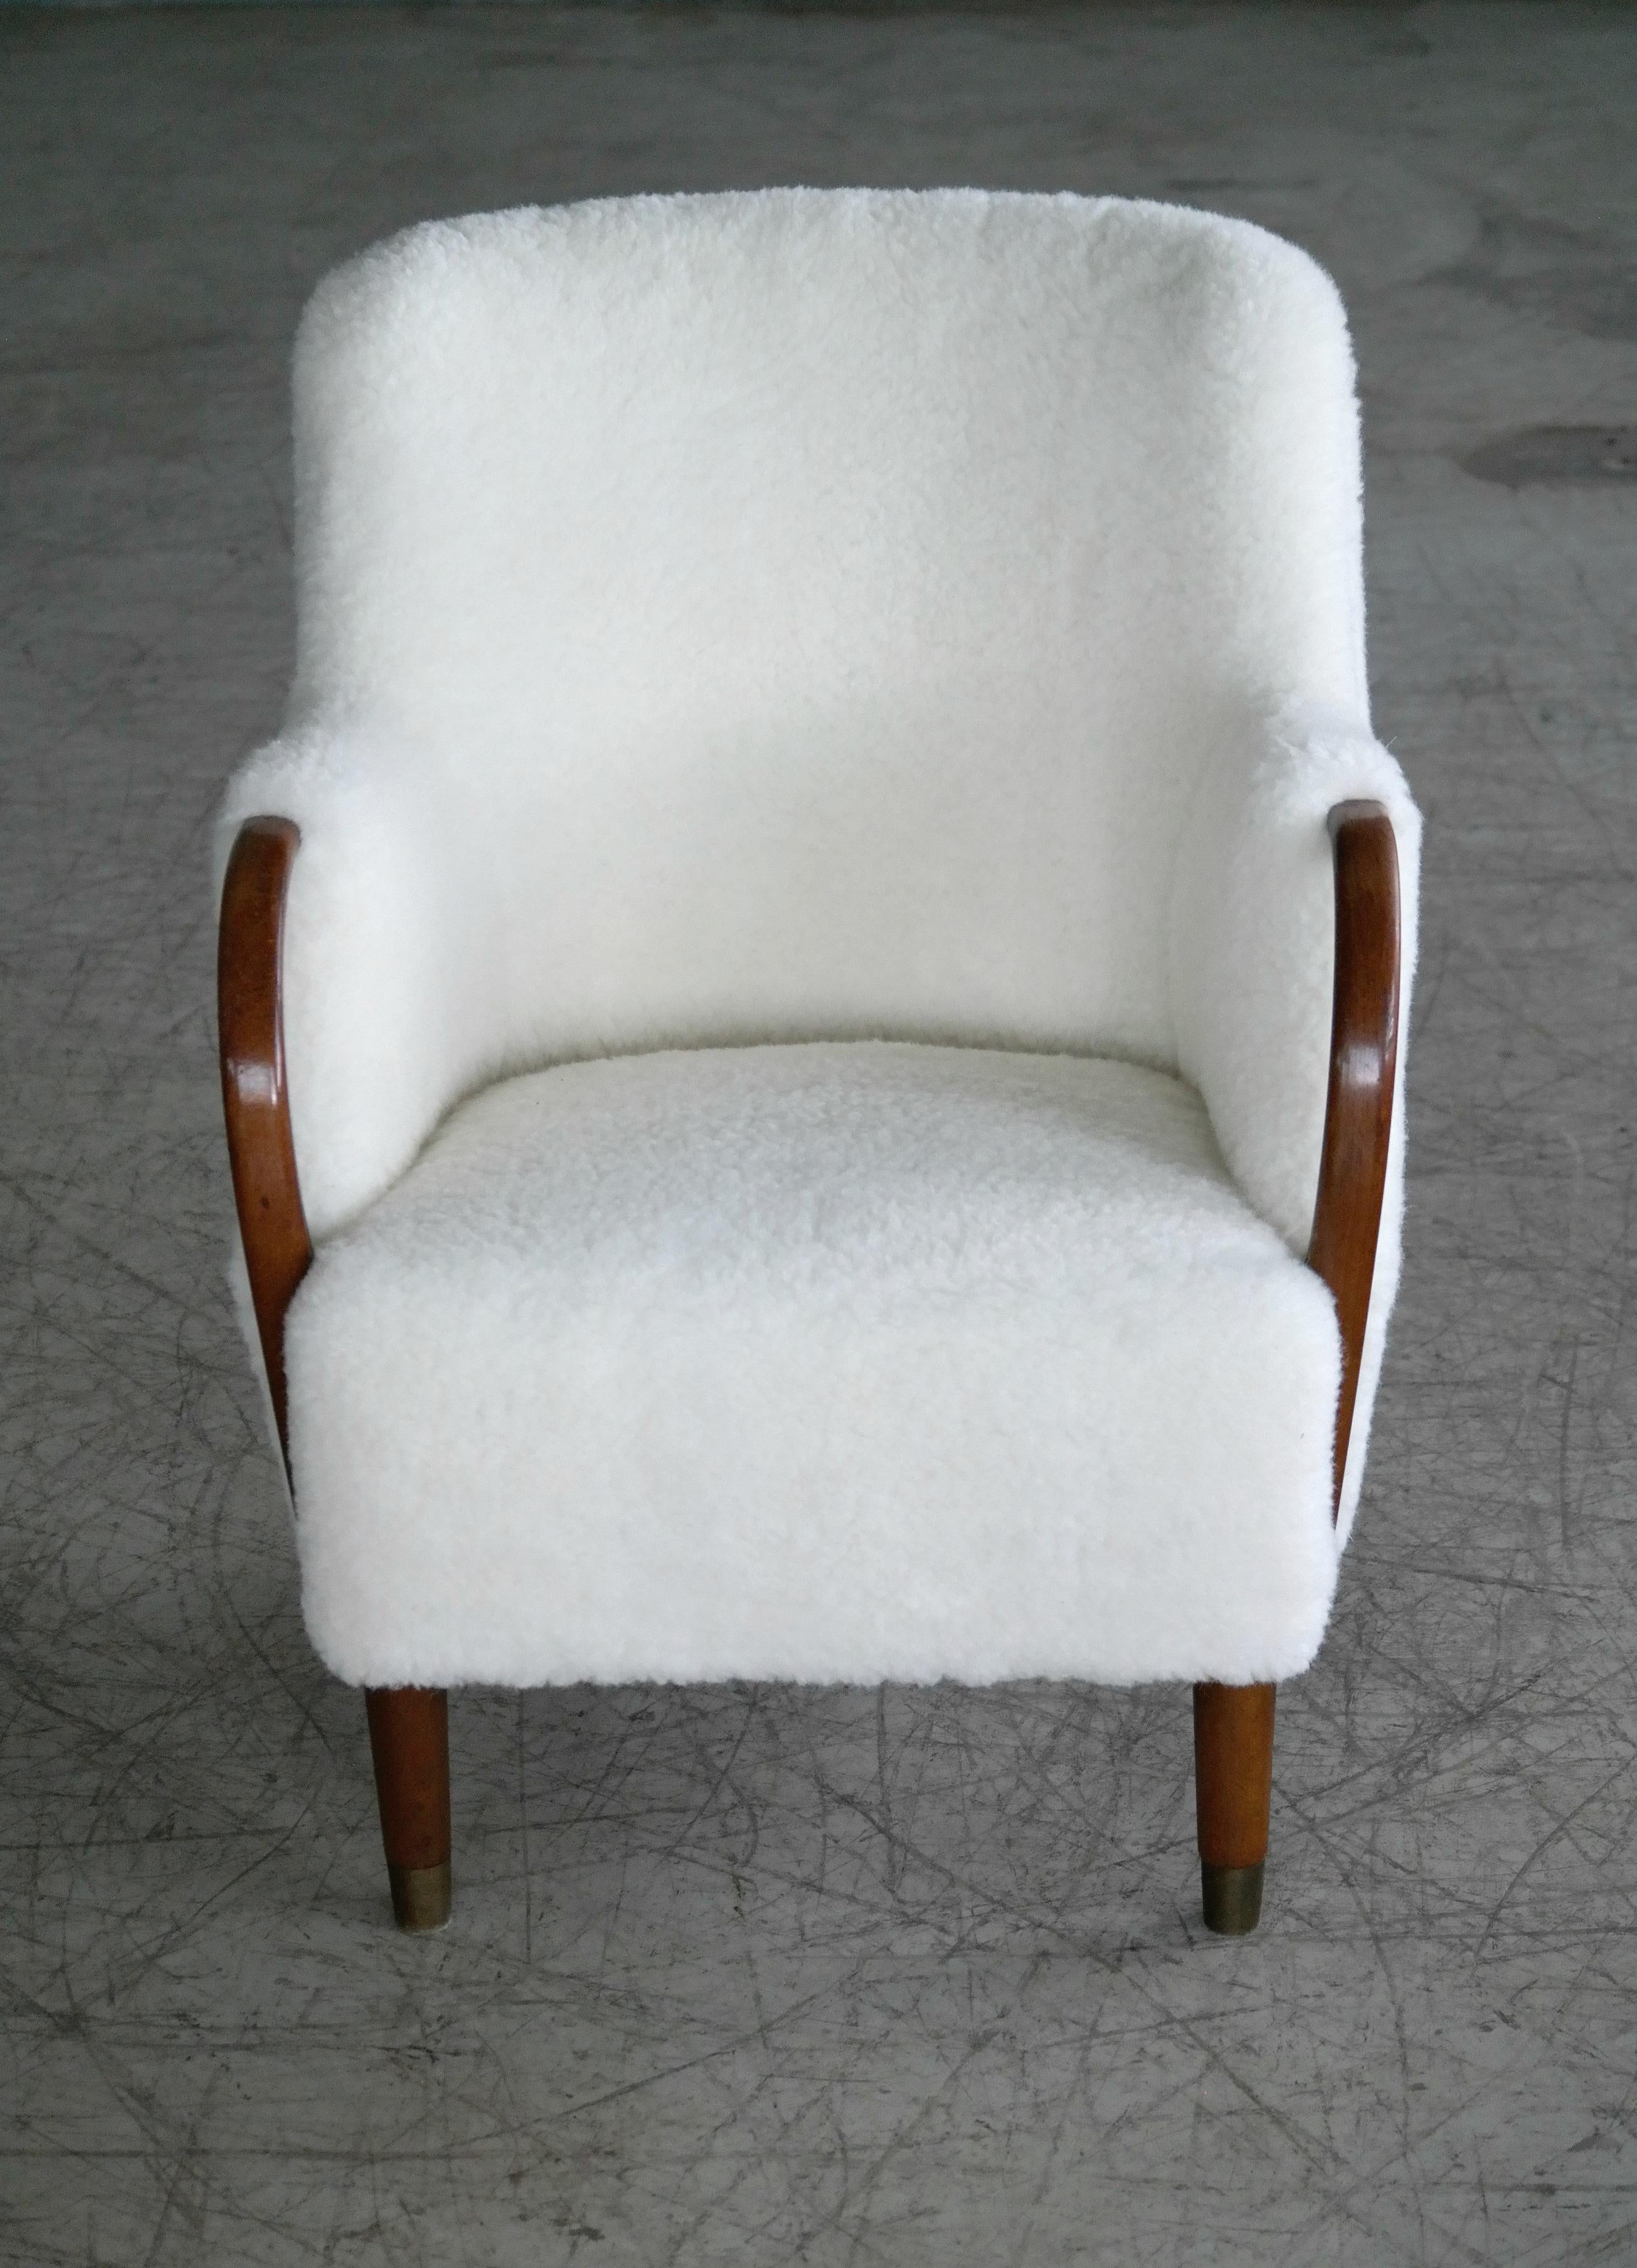 Unique and just superb lounge chair with open armrests designed and made as a match the model 96 settee by N.A. Jørgensens Møbelfabrik around 1955. N.A. Jørgensen is better known under the name Bramin Mobler a name they adopted in the 1960s. N.A.